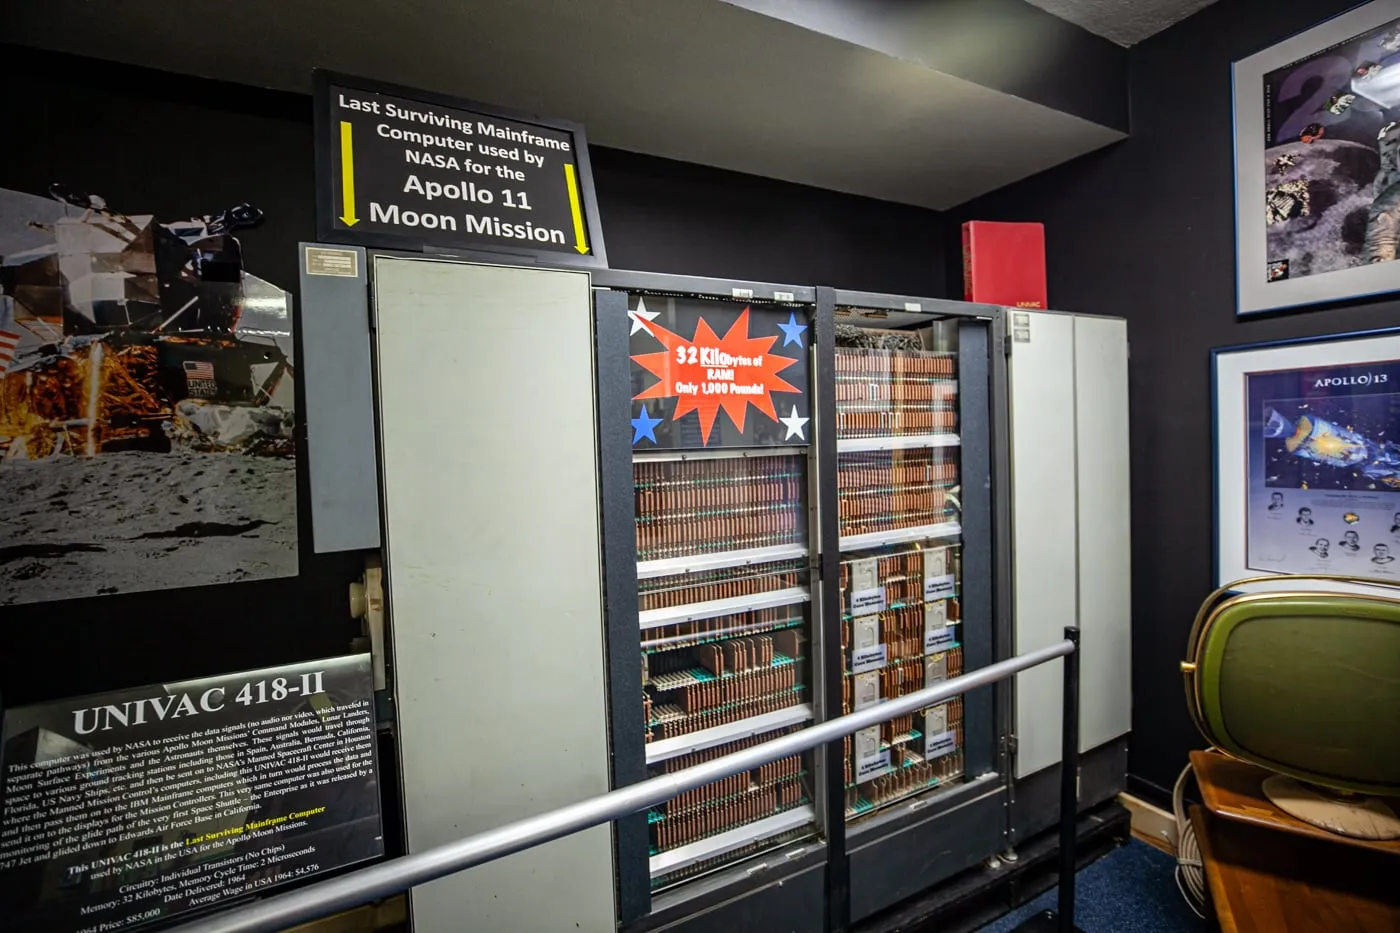 Last surviving mainframe computer used by NASA for the Apollo 11 Moon Mission - American Computer & Robotics Museum in Bozeman, Montana